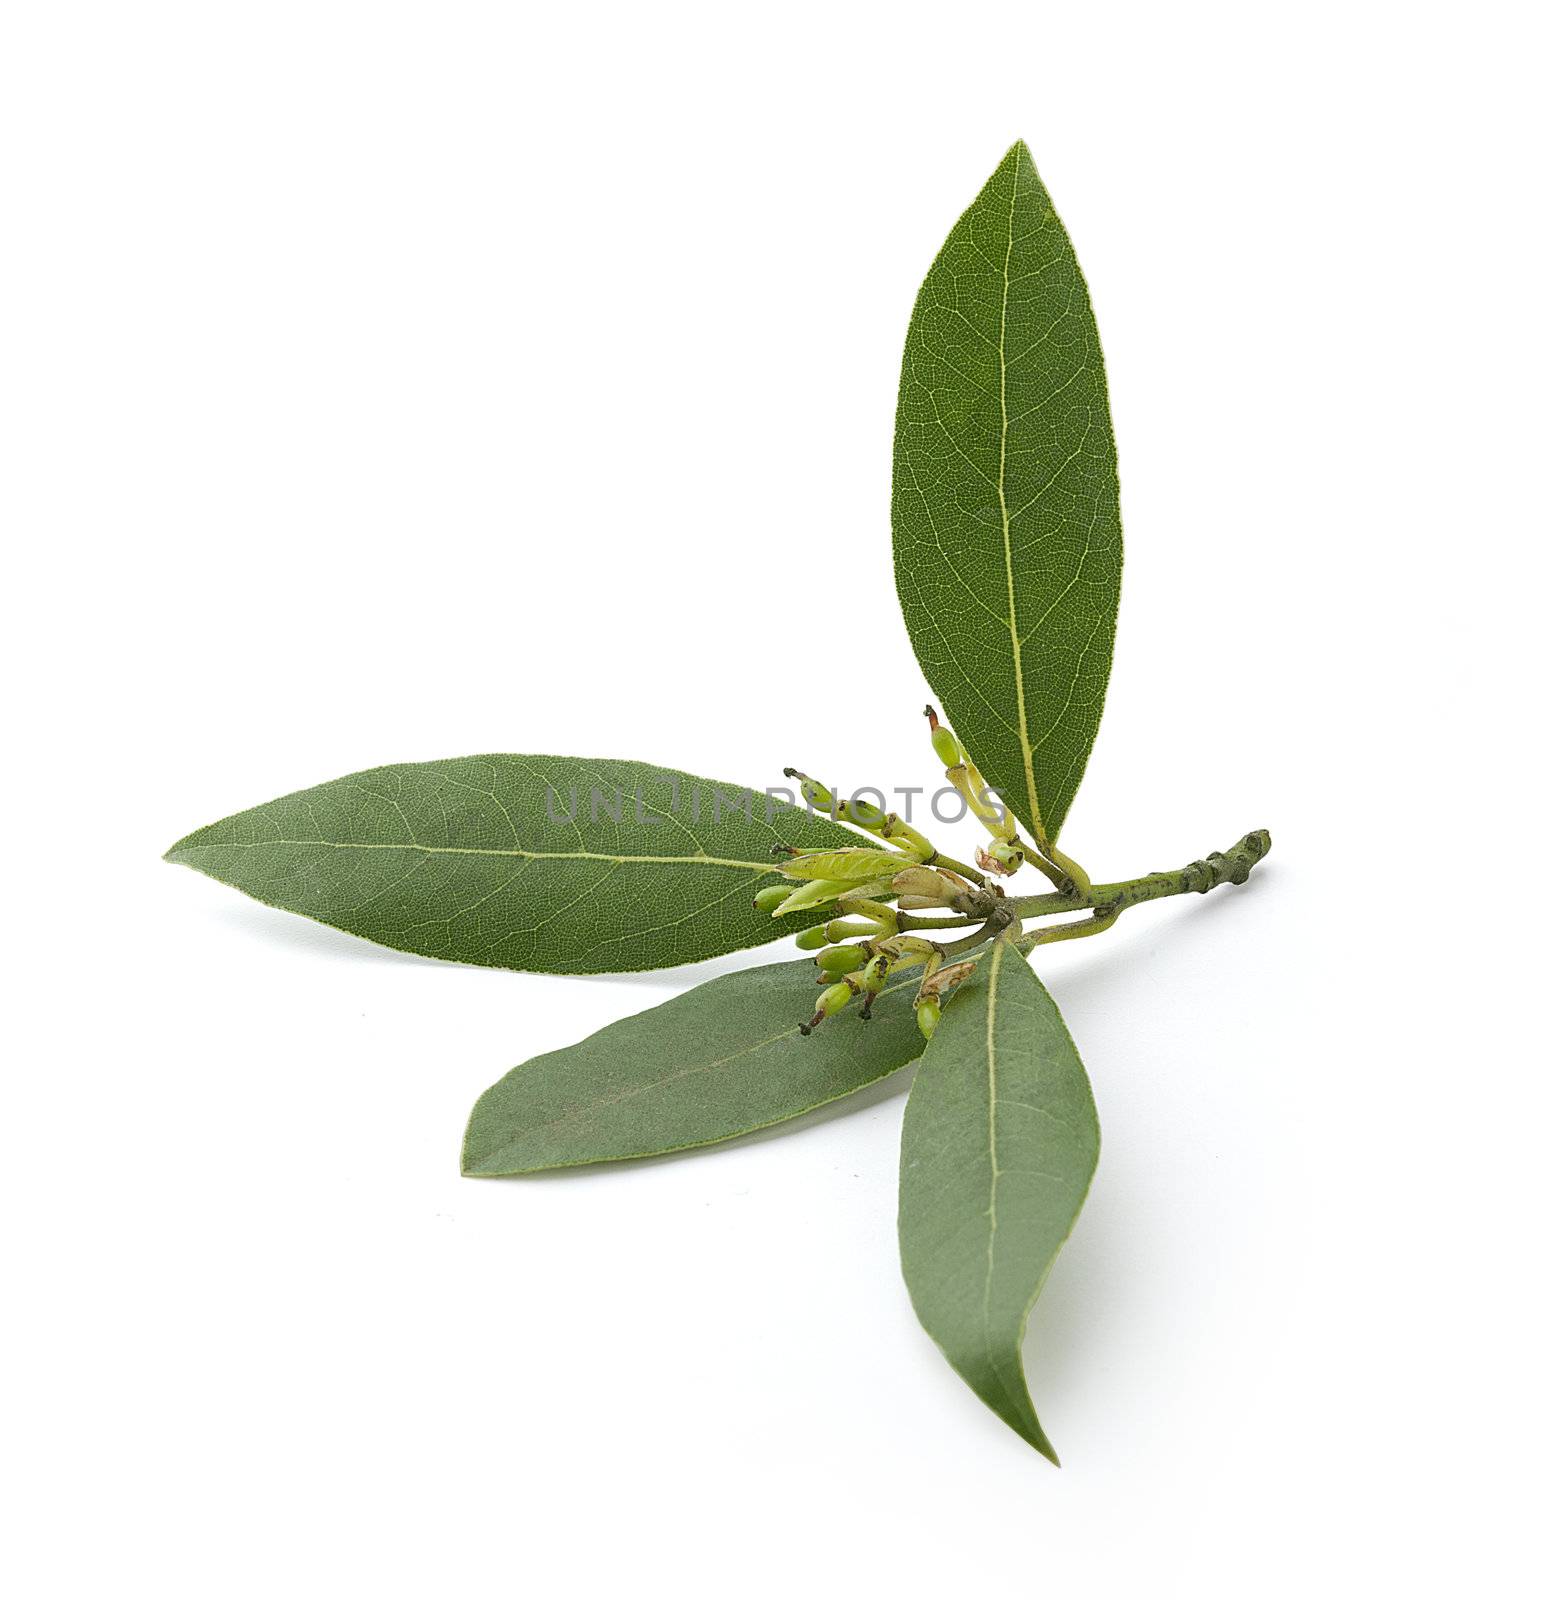 Little branch of bay leaf on the white background